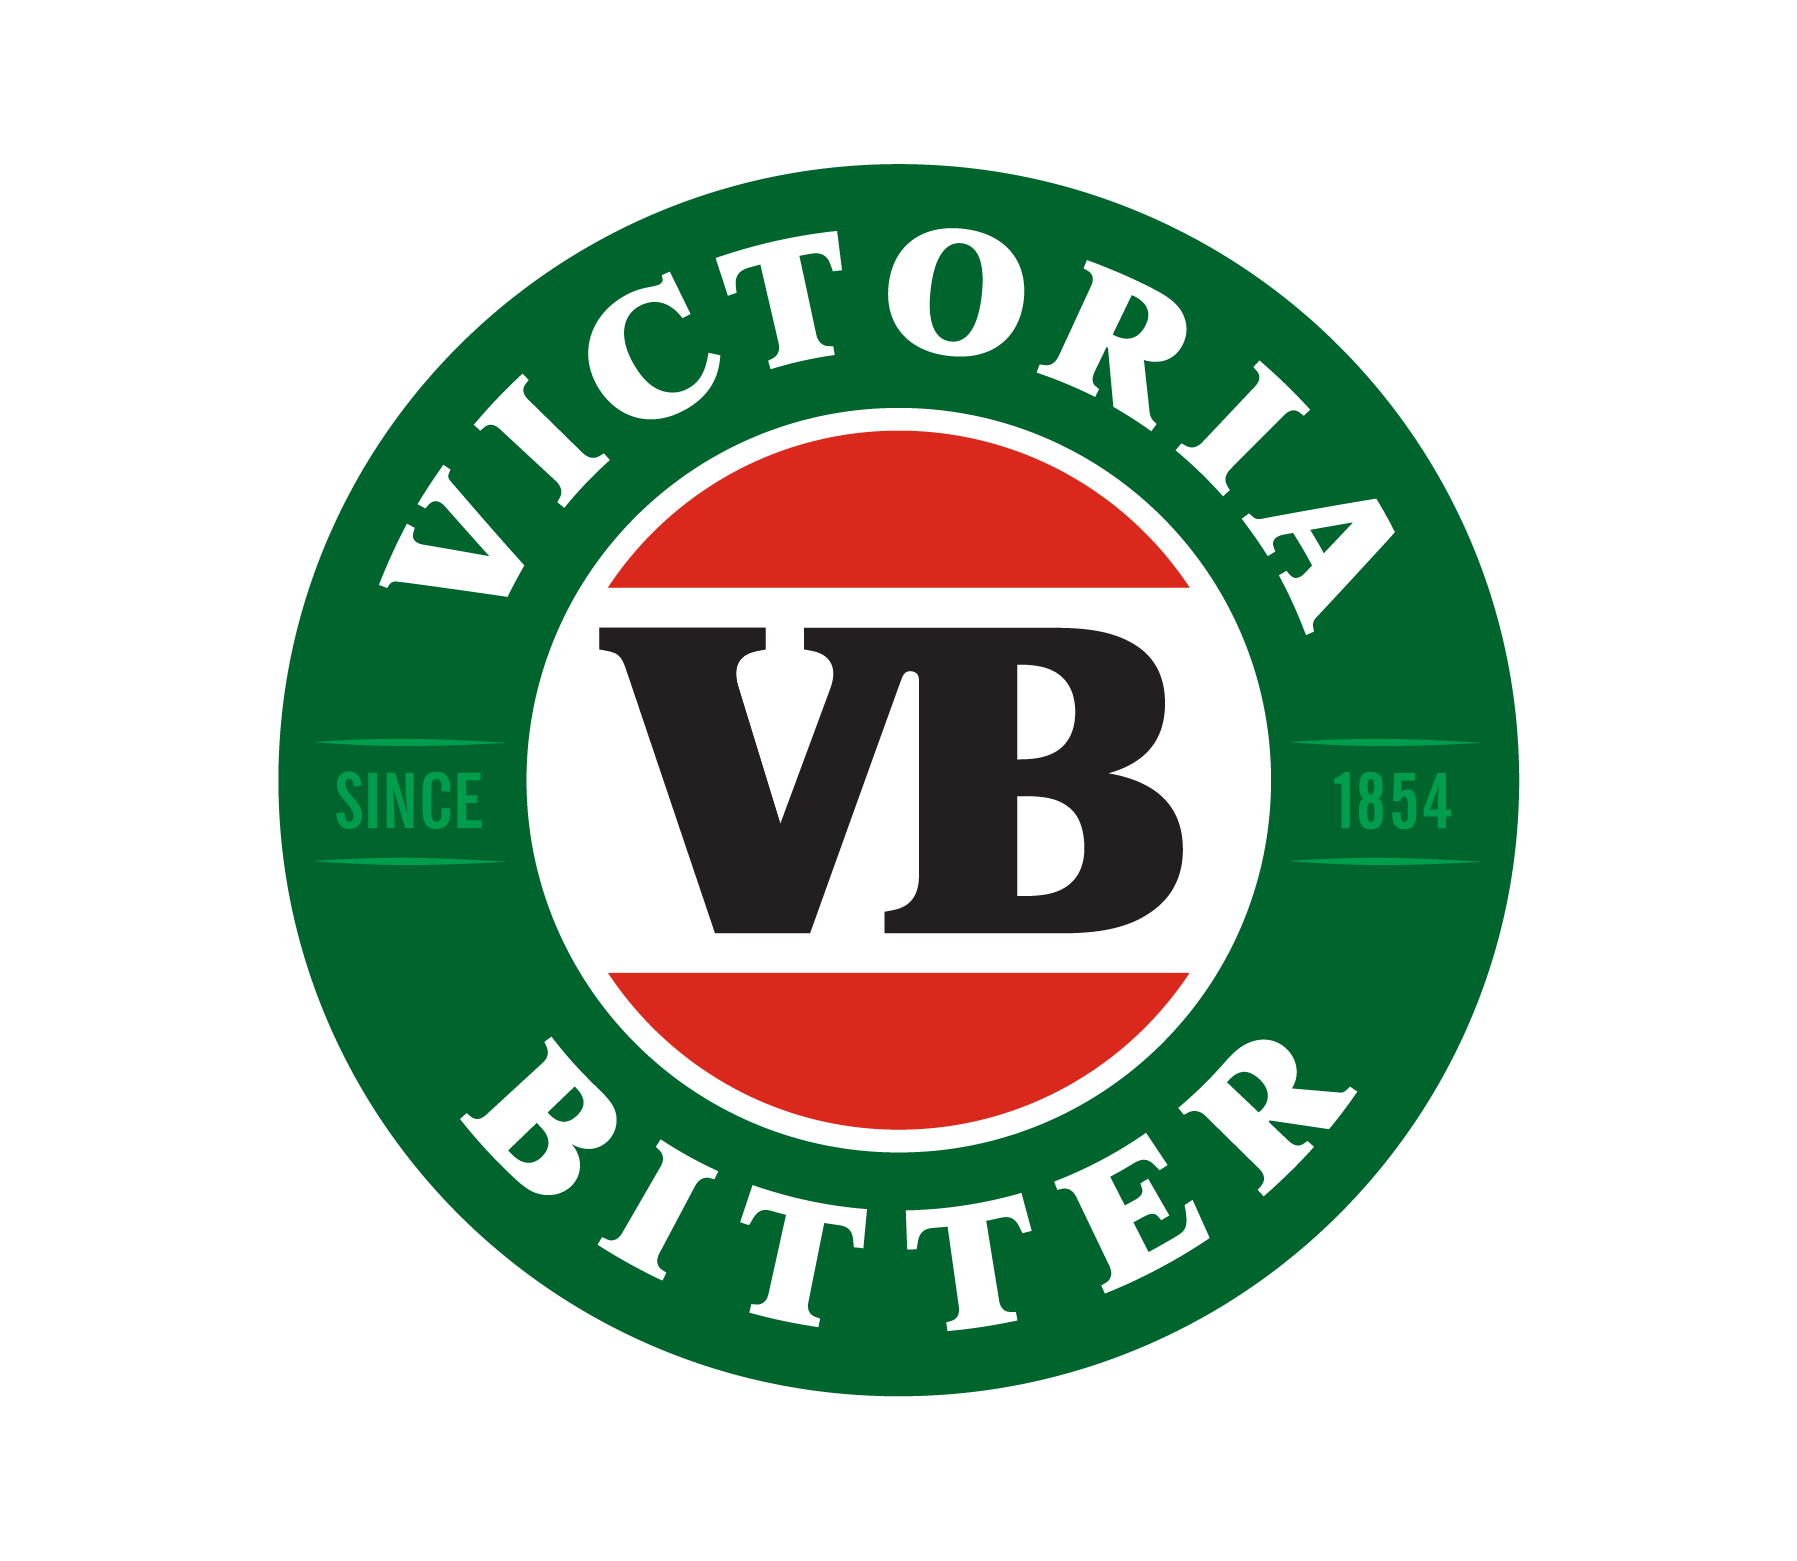 Victorian Black and White Logo - Victoria Bitter - For a hard earned thirst.